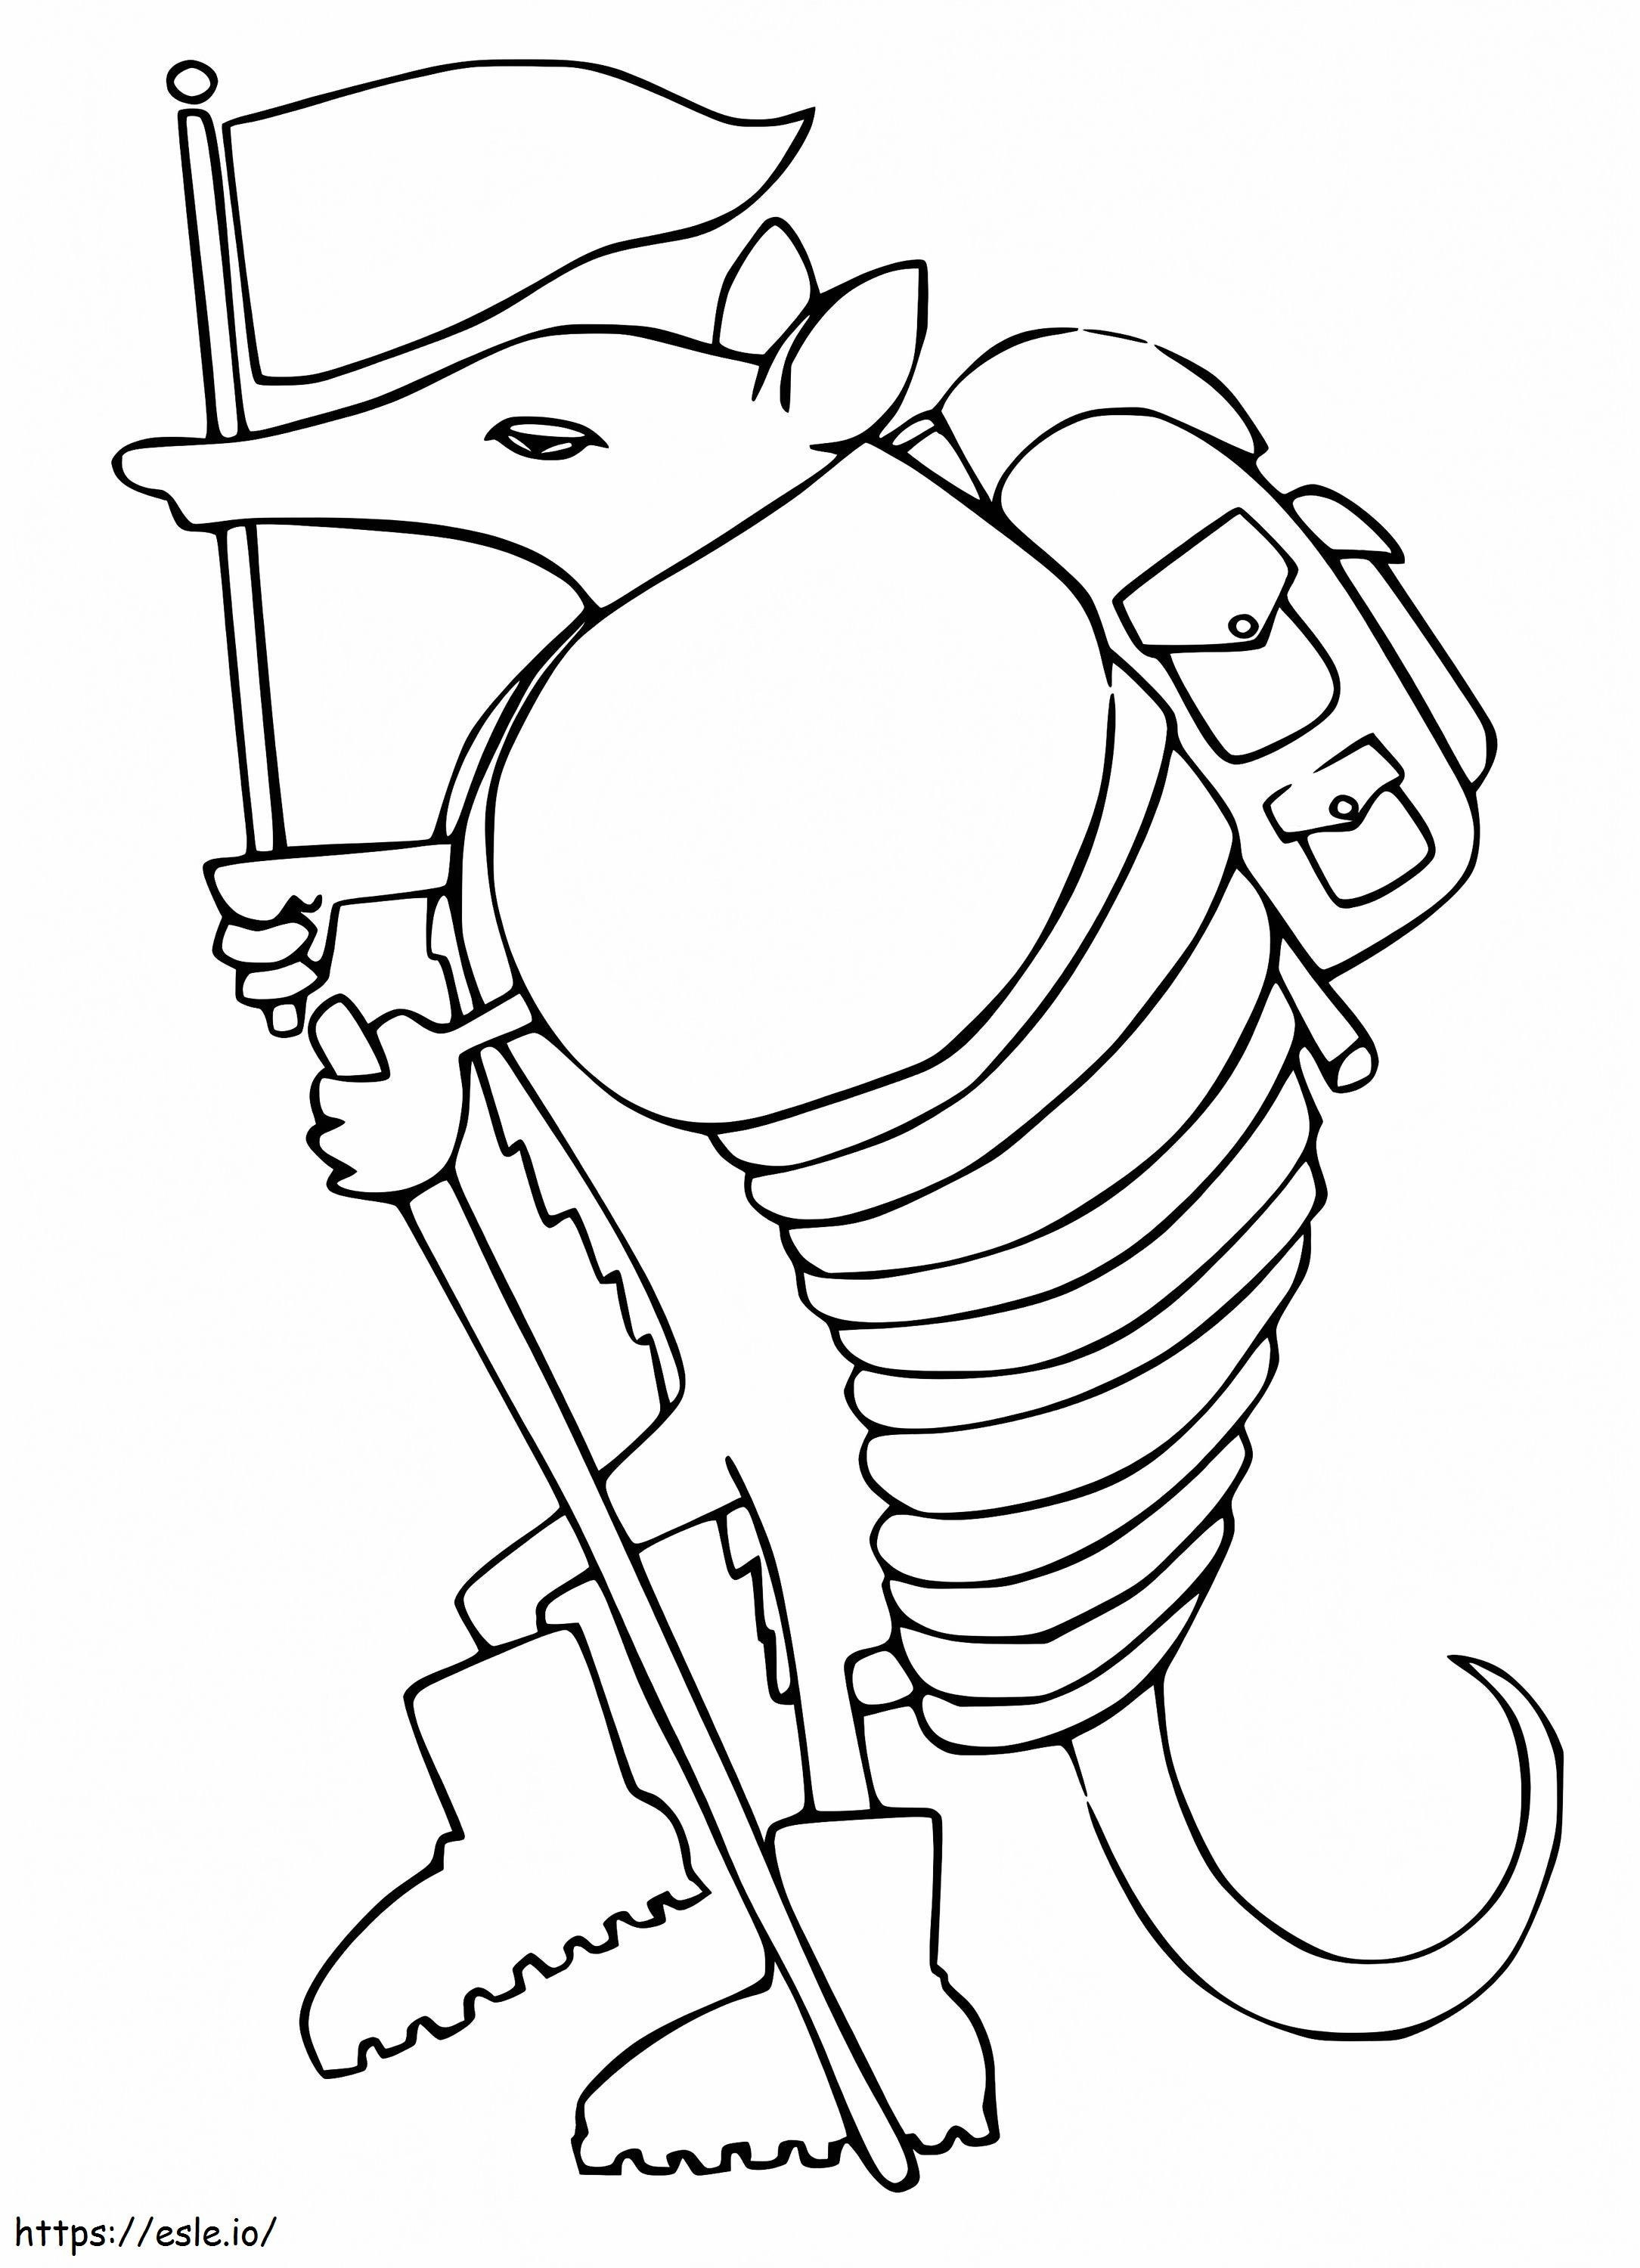 Armadilo Hiking coloring page